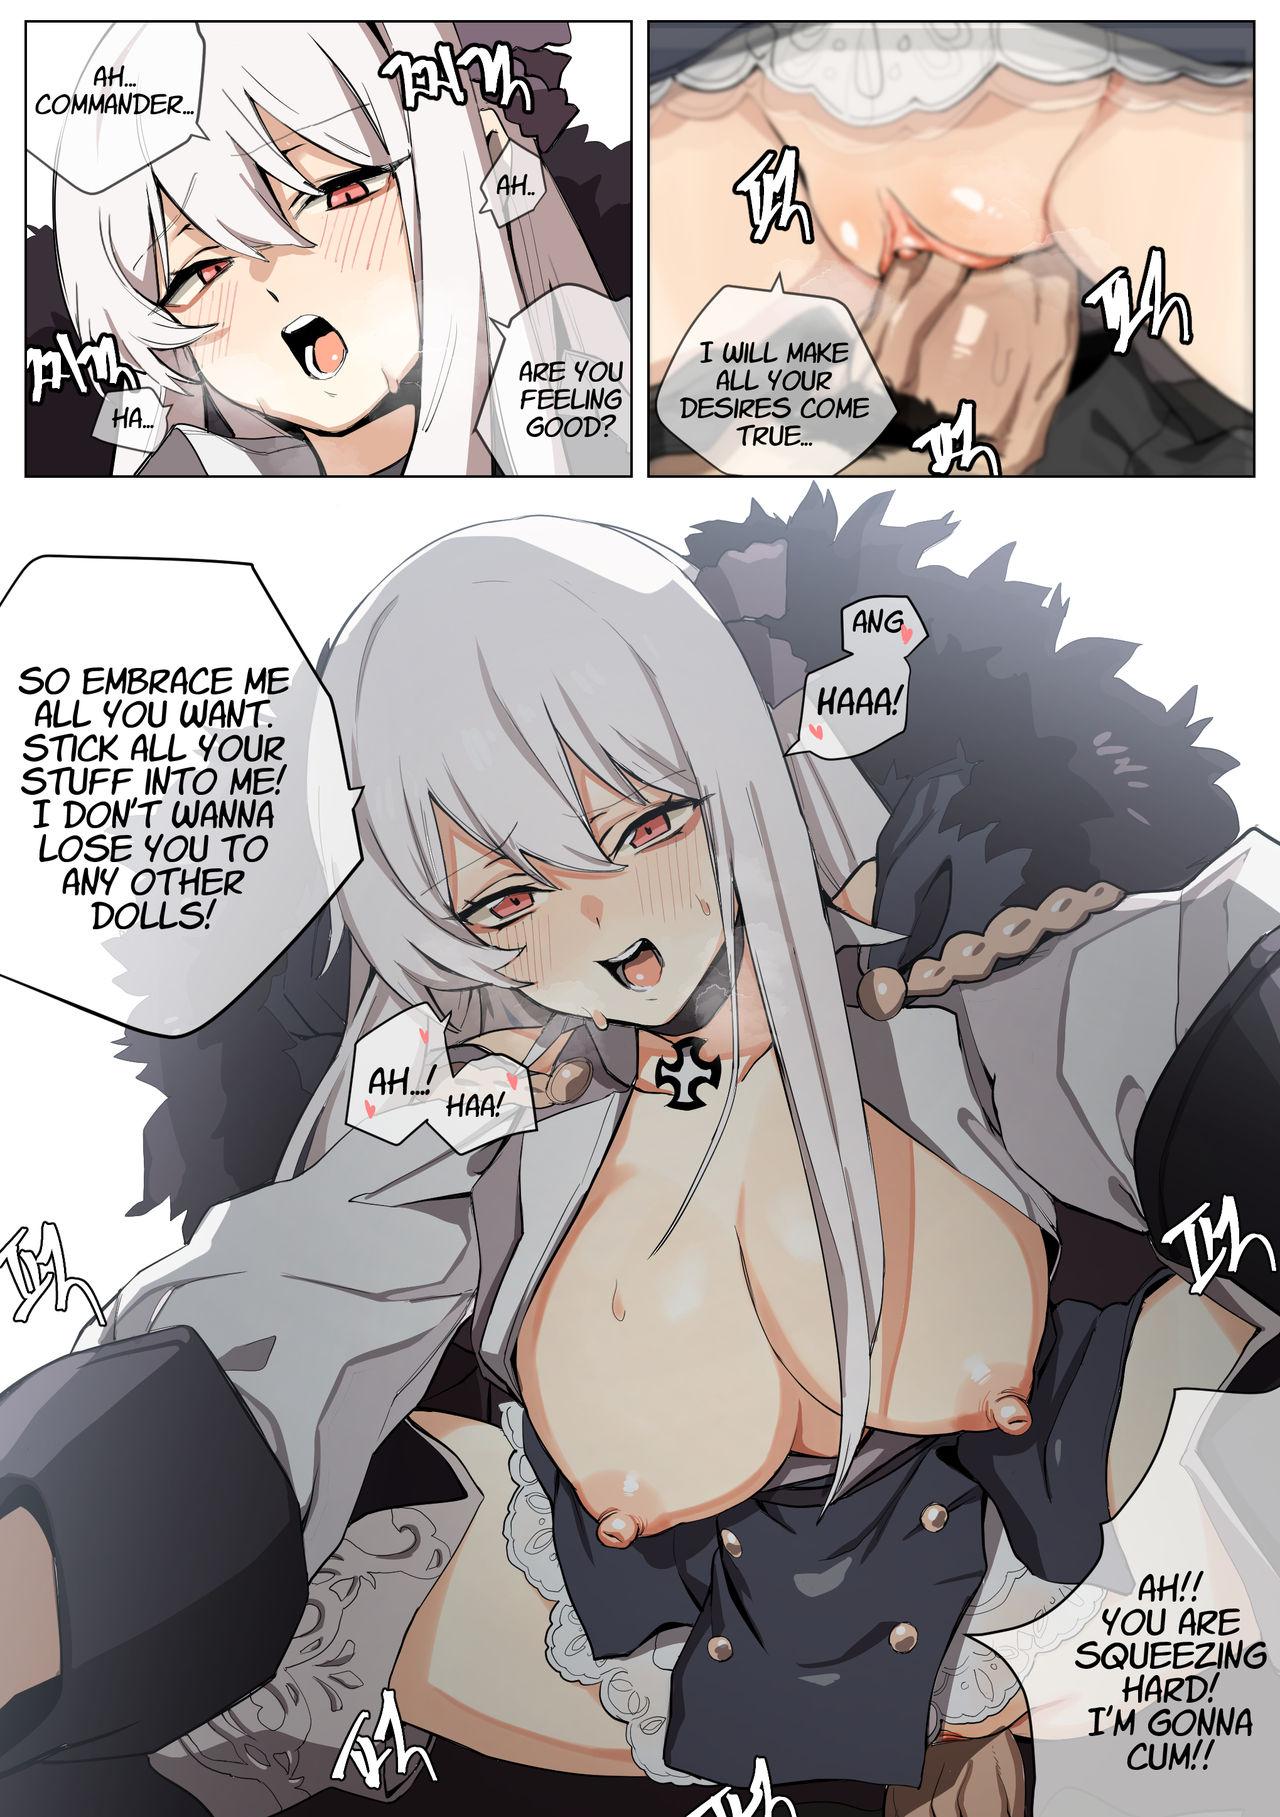 Leaked Hobby - Girls frontline Sexcam - Page 15